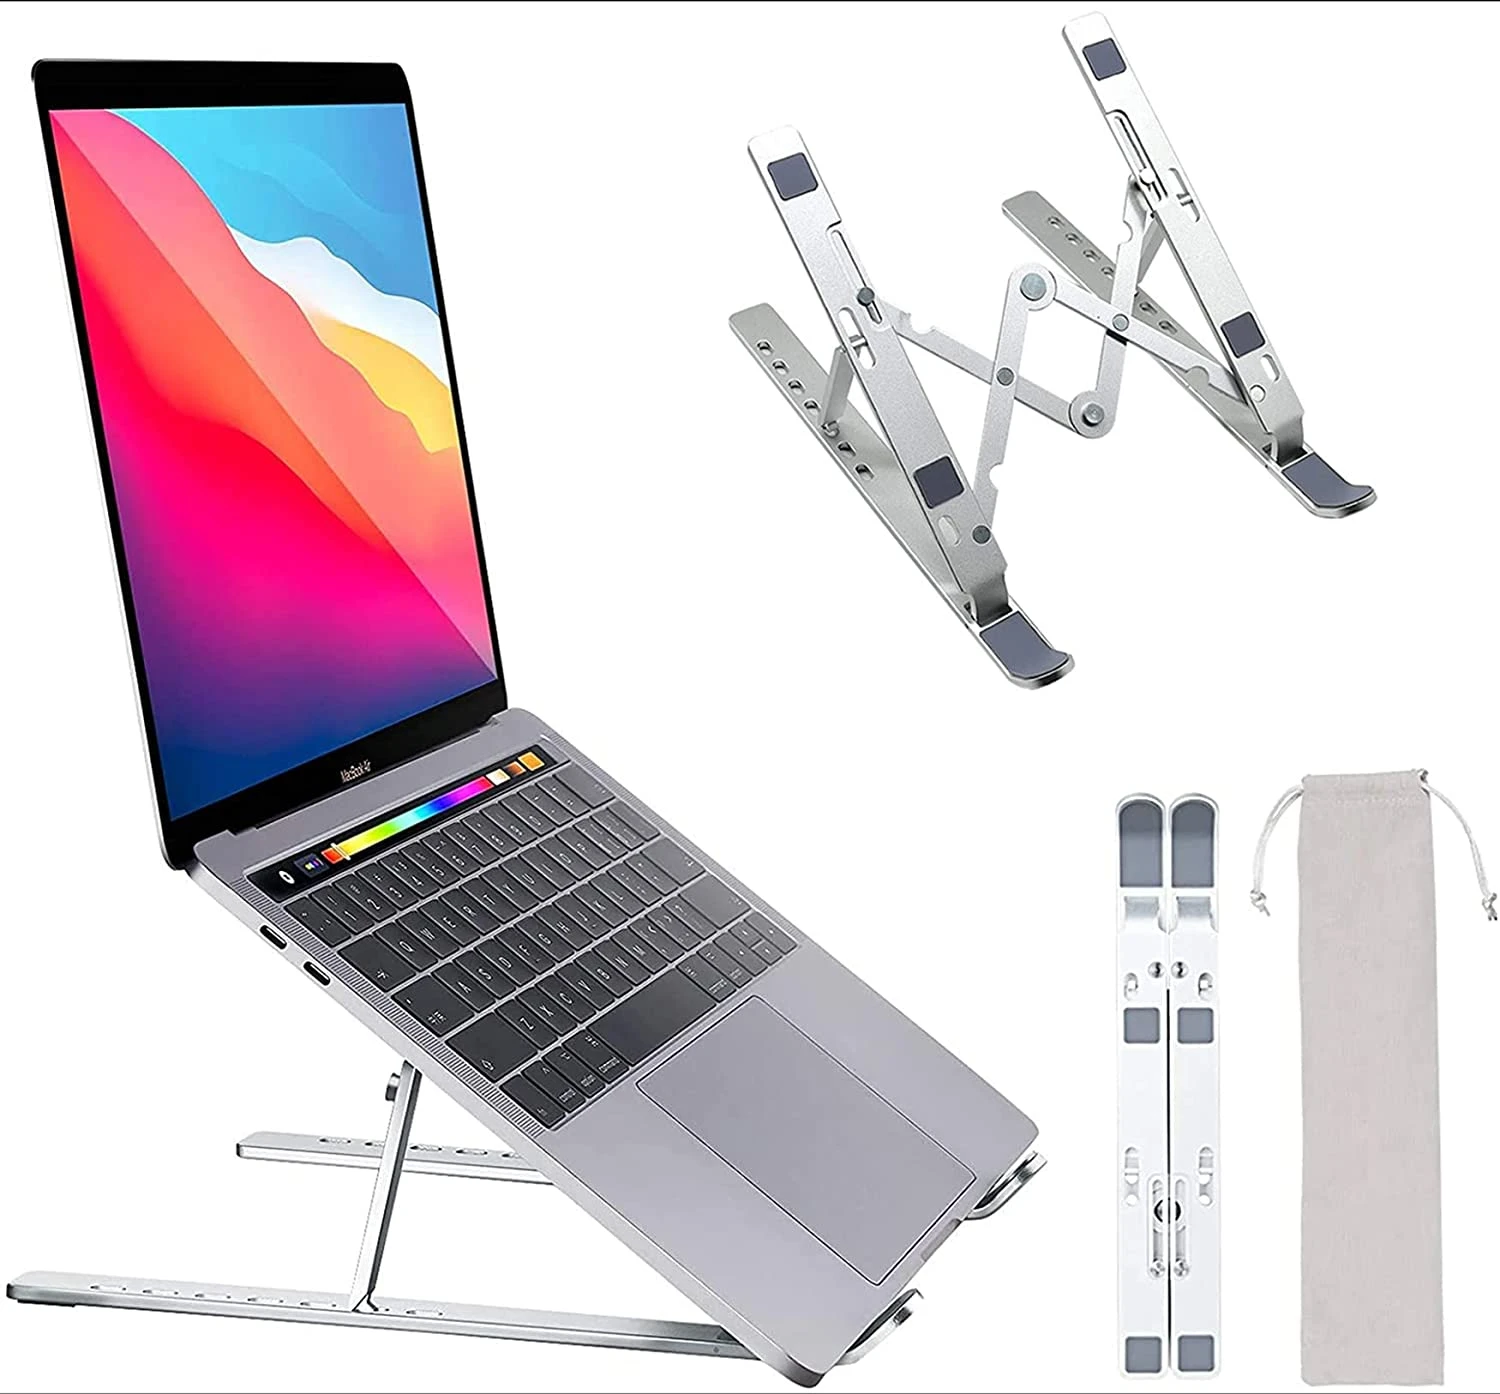 Relatively Vibrate Sandy Portable Laptop Stand Aluminium Bracket Foldable Macbook Pro Air Support  Adjustable Notebook Holder Tablet Base For Pc Computer - Laptop Stand -  AliExpress